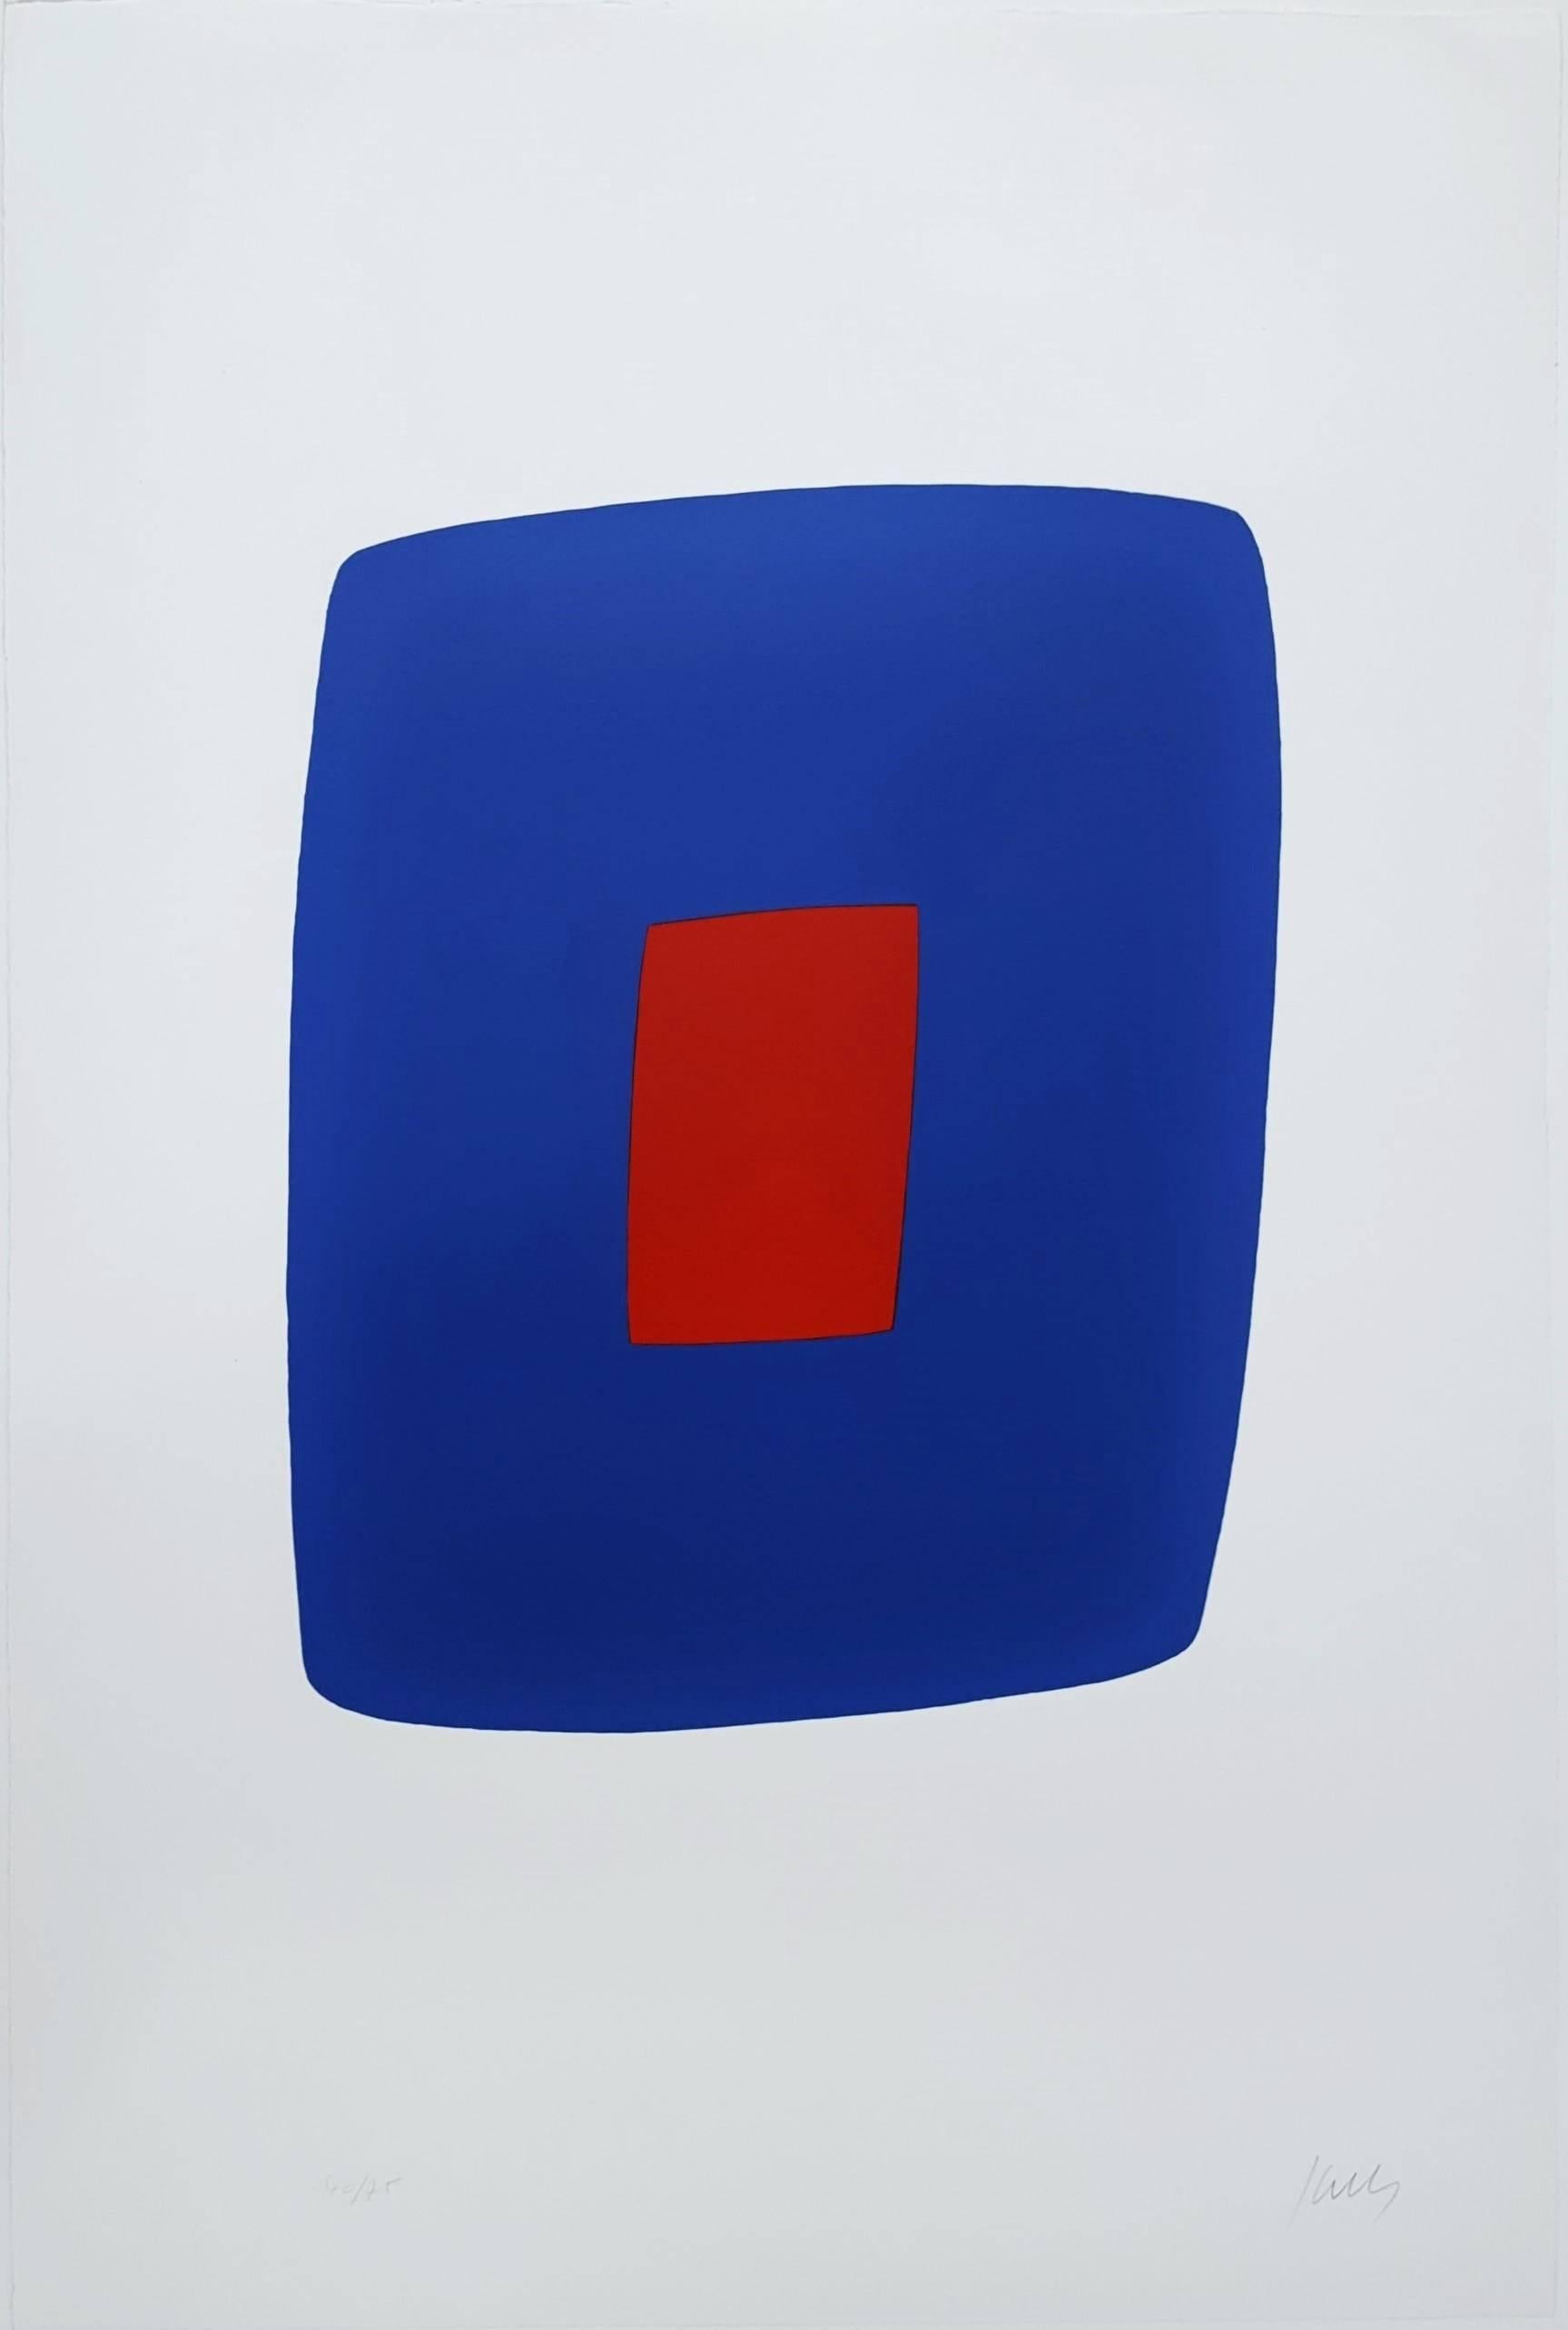 Ellsworth Kelly Abstract Print - Dark Blue with Red (VI.7)